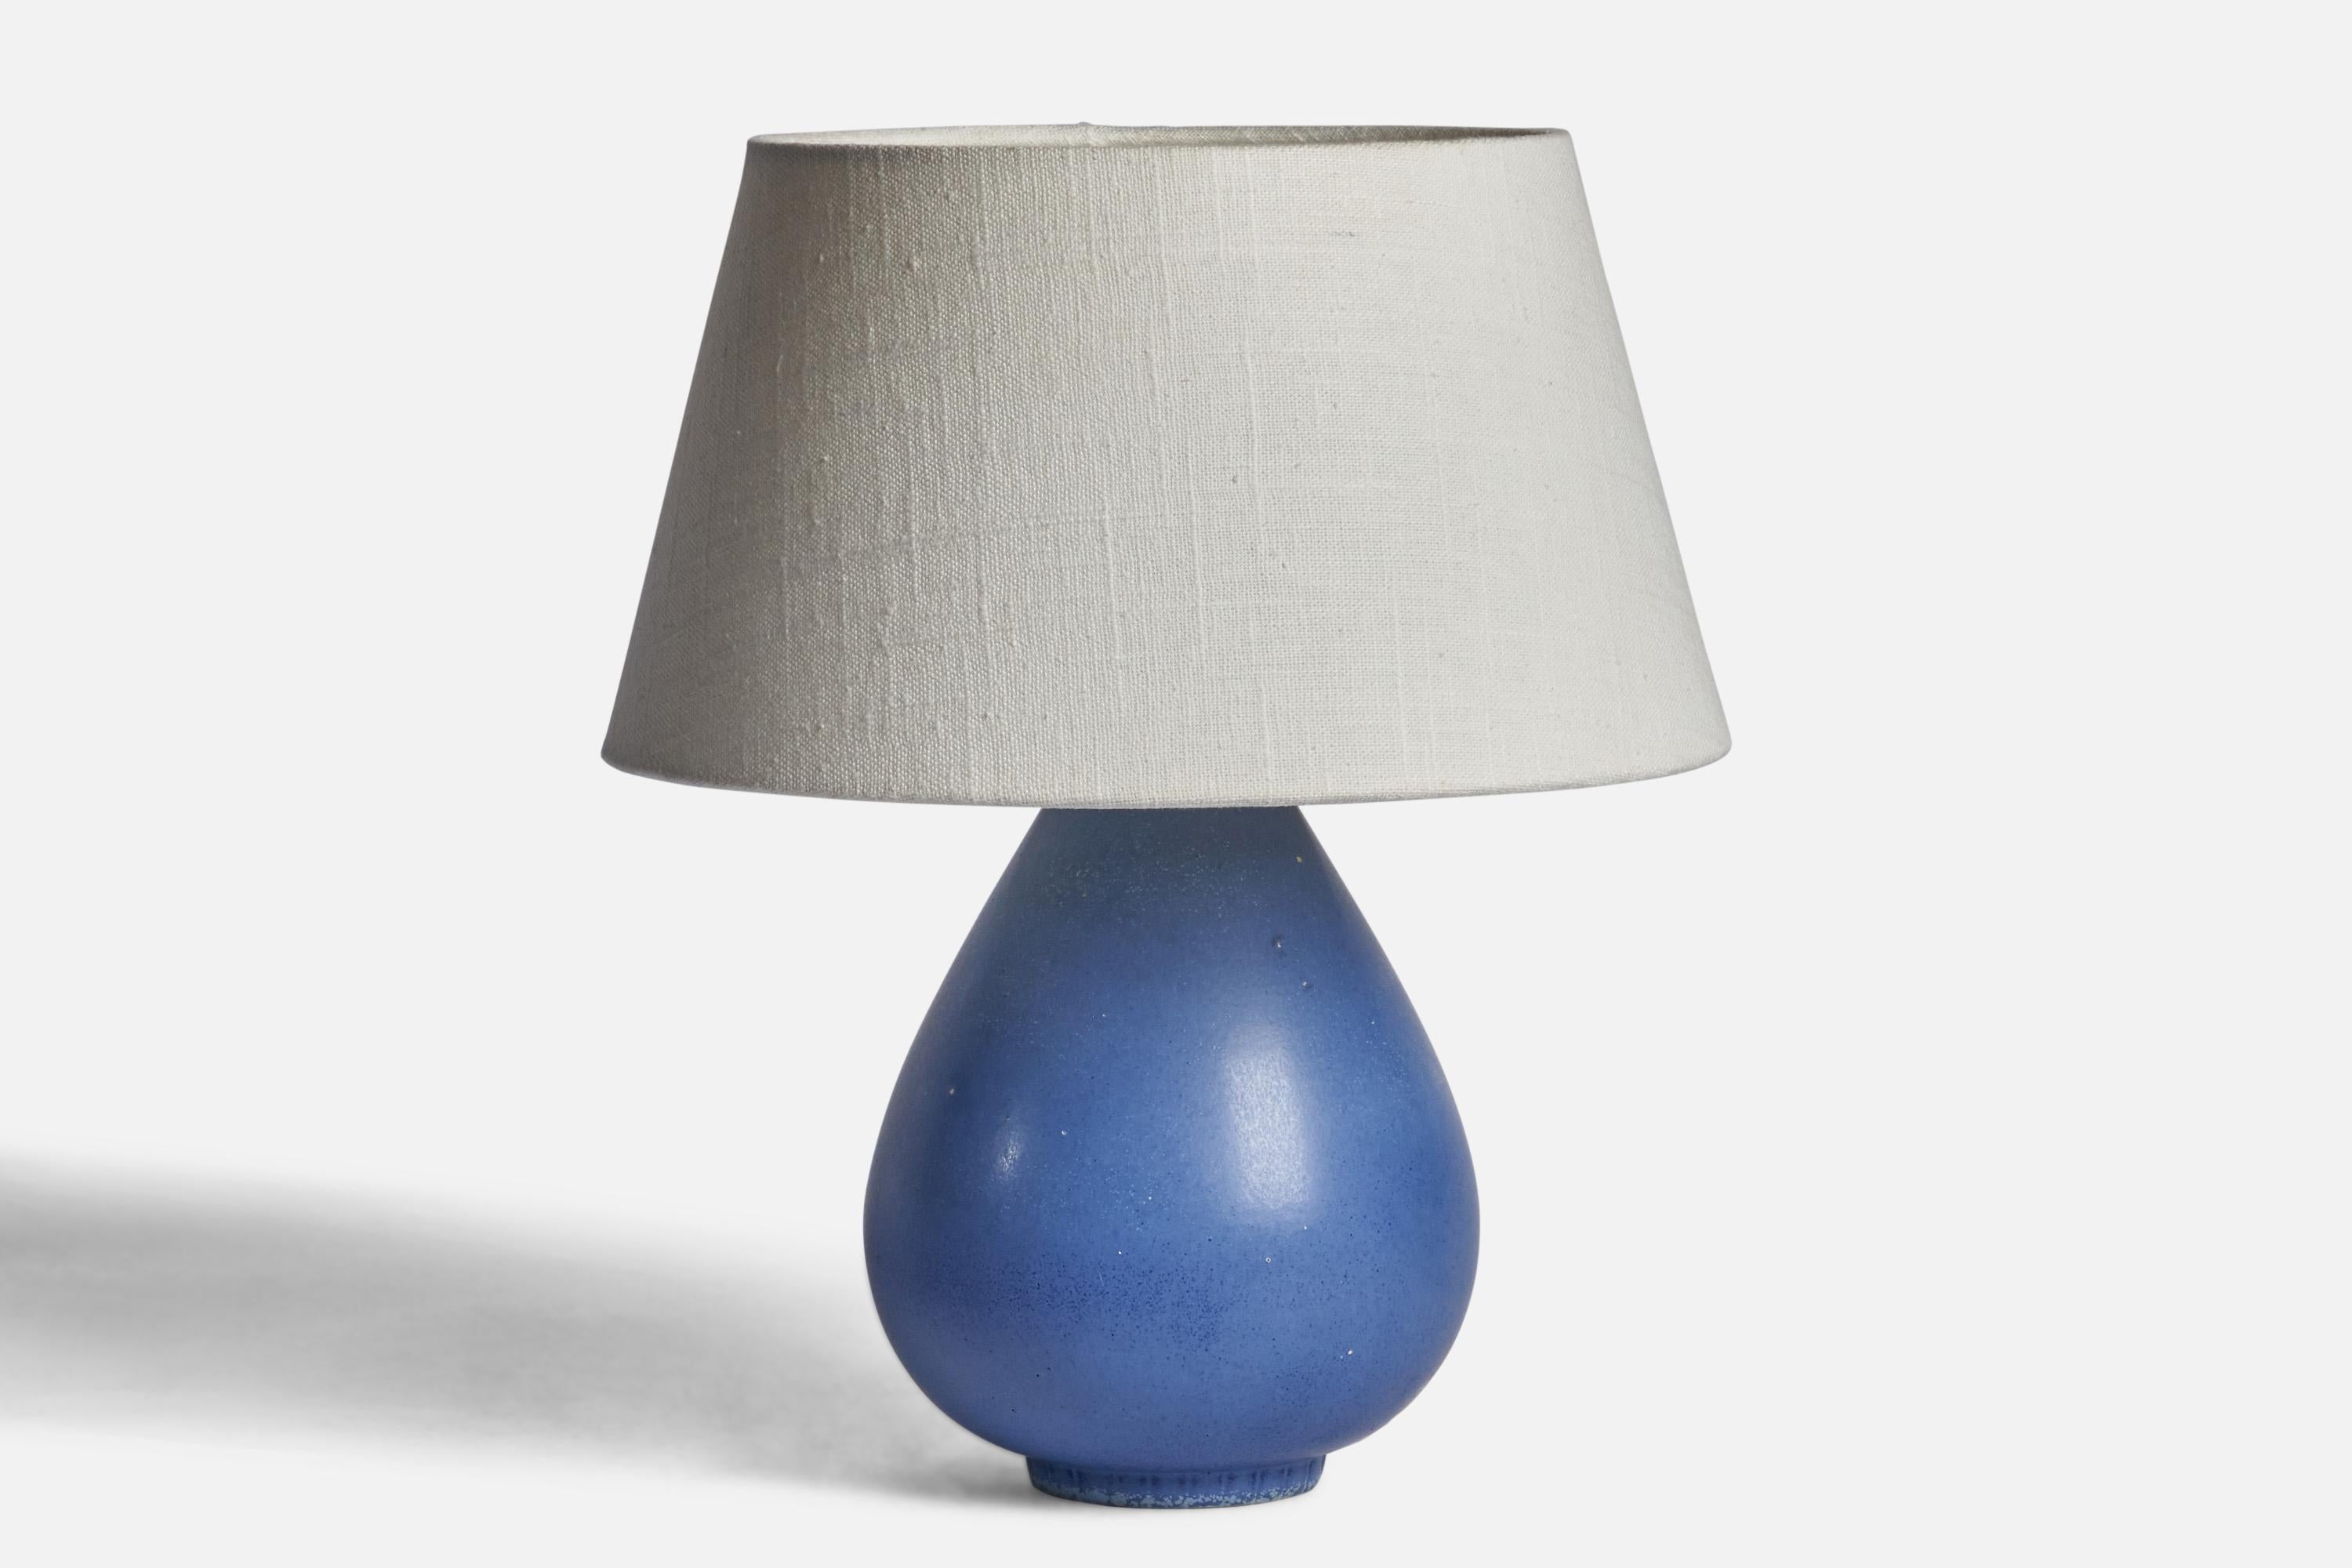 A blue-glazed stoneware table lamp designed by Gunnar Nylund and produced by Rörstrand, Sweden, 1940s.

Dimensions of Lamp (inches): 9” H x 5.25” Diameter
Dimensions of Shade (inches): 7” Top Diameter x 10” Bottom Diameter x 5.5” H 
Dimensions of